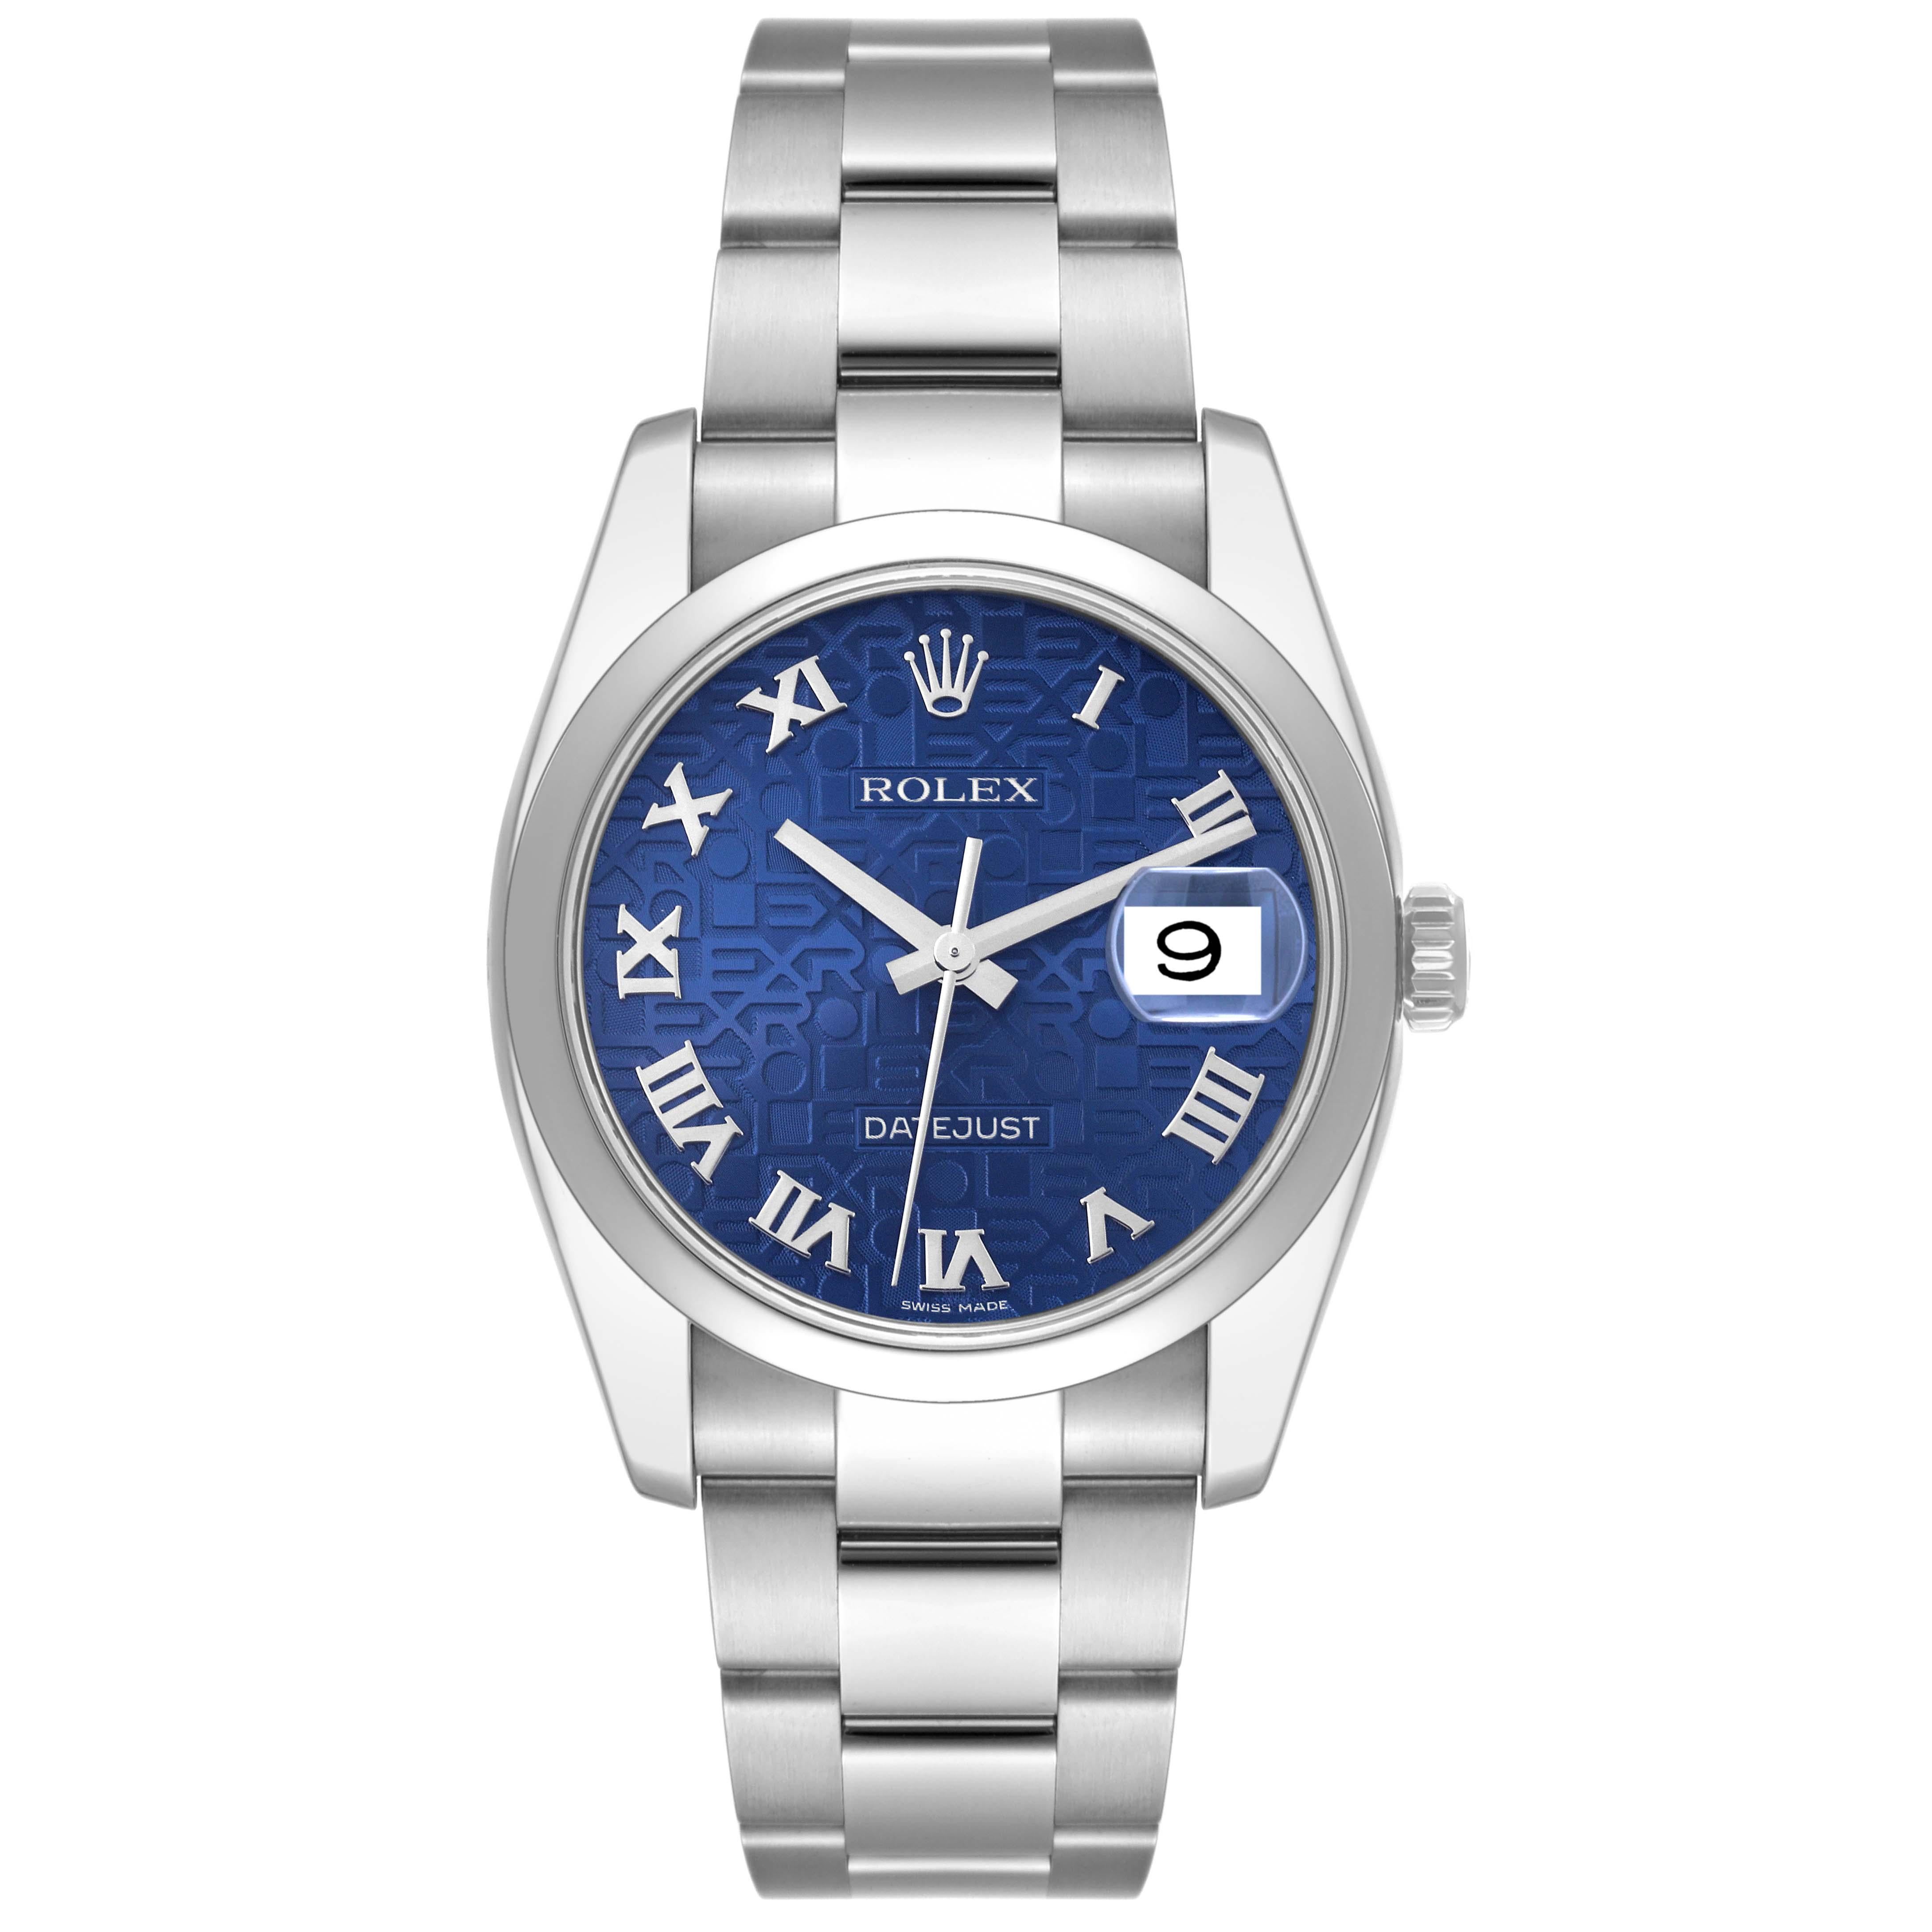 Rolex Datejust Blue Anniversary Dial Steel Mens Watch 116200. Officially certified chronometer self-winding movement. Stainless steel case 36.0 mm in diameter. Rolex logo on a crown. Stainless steel smooth domed bezel. Scratch resistant sapphire